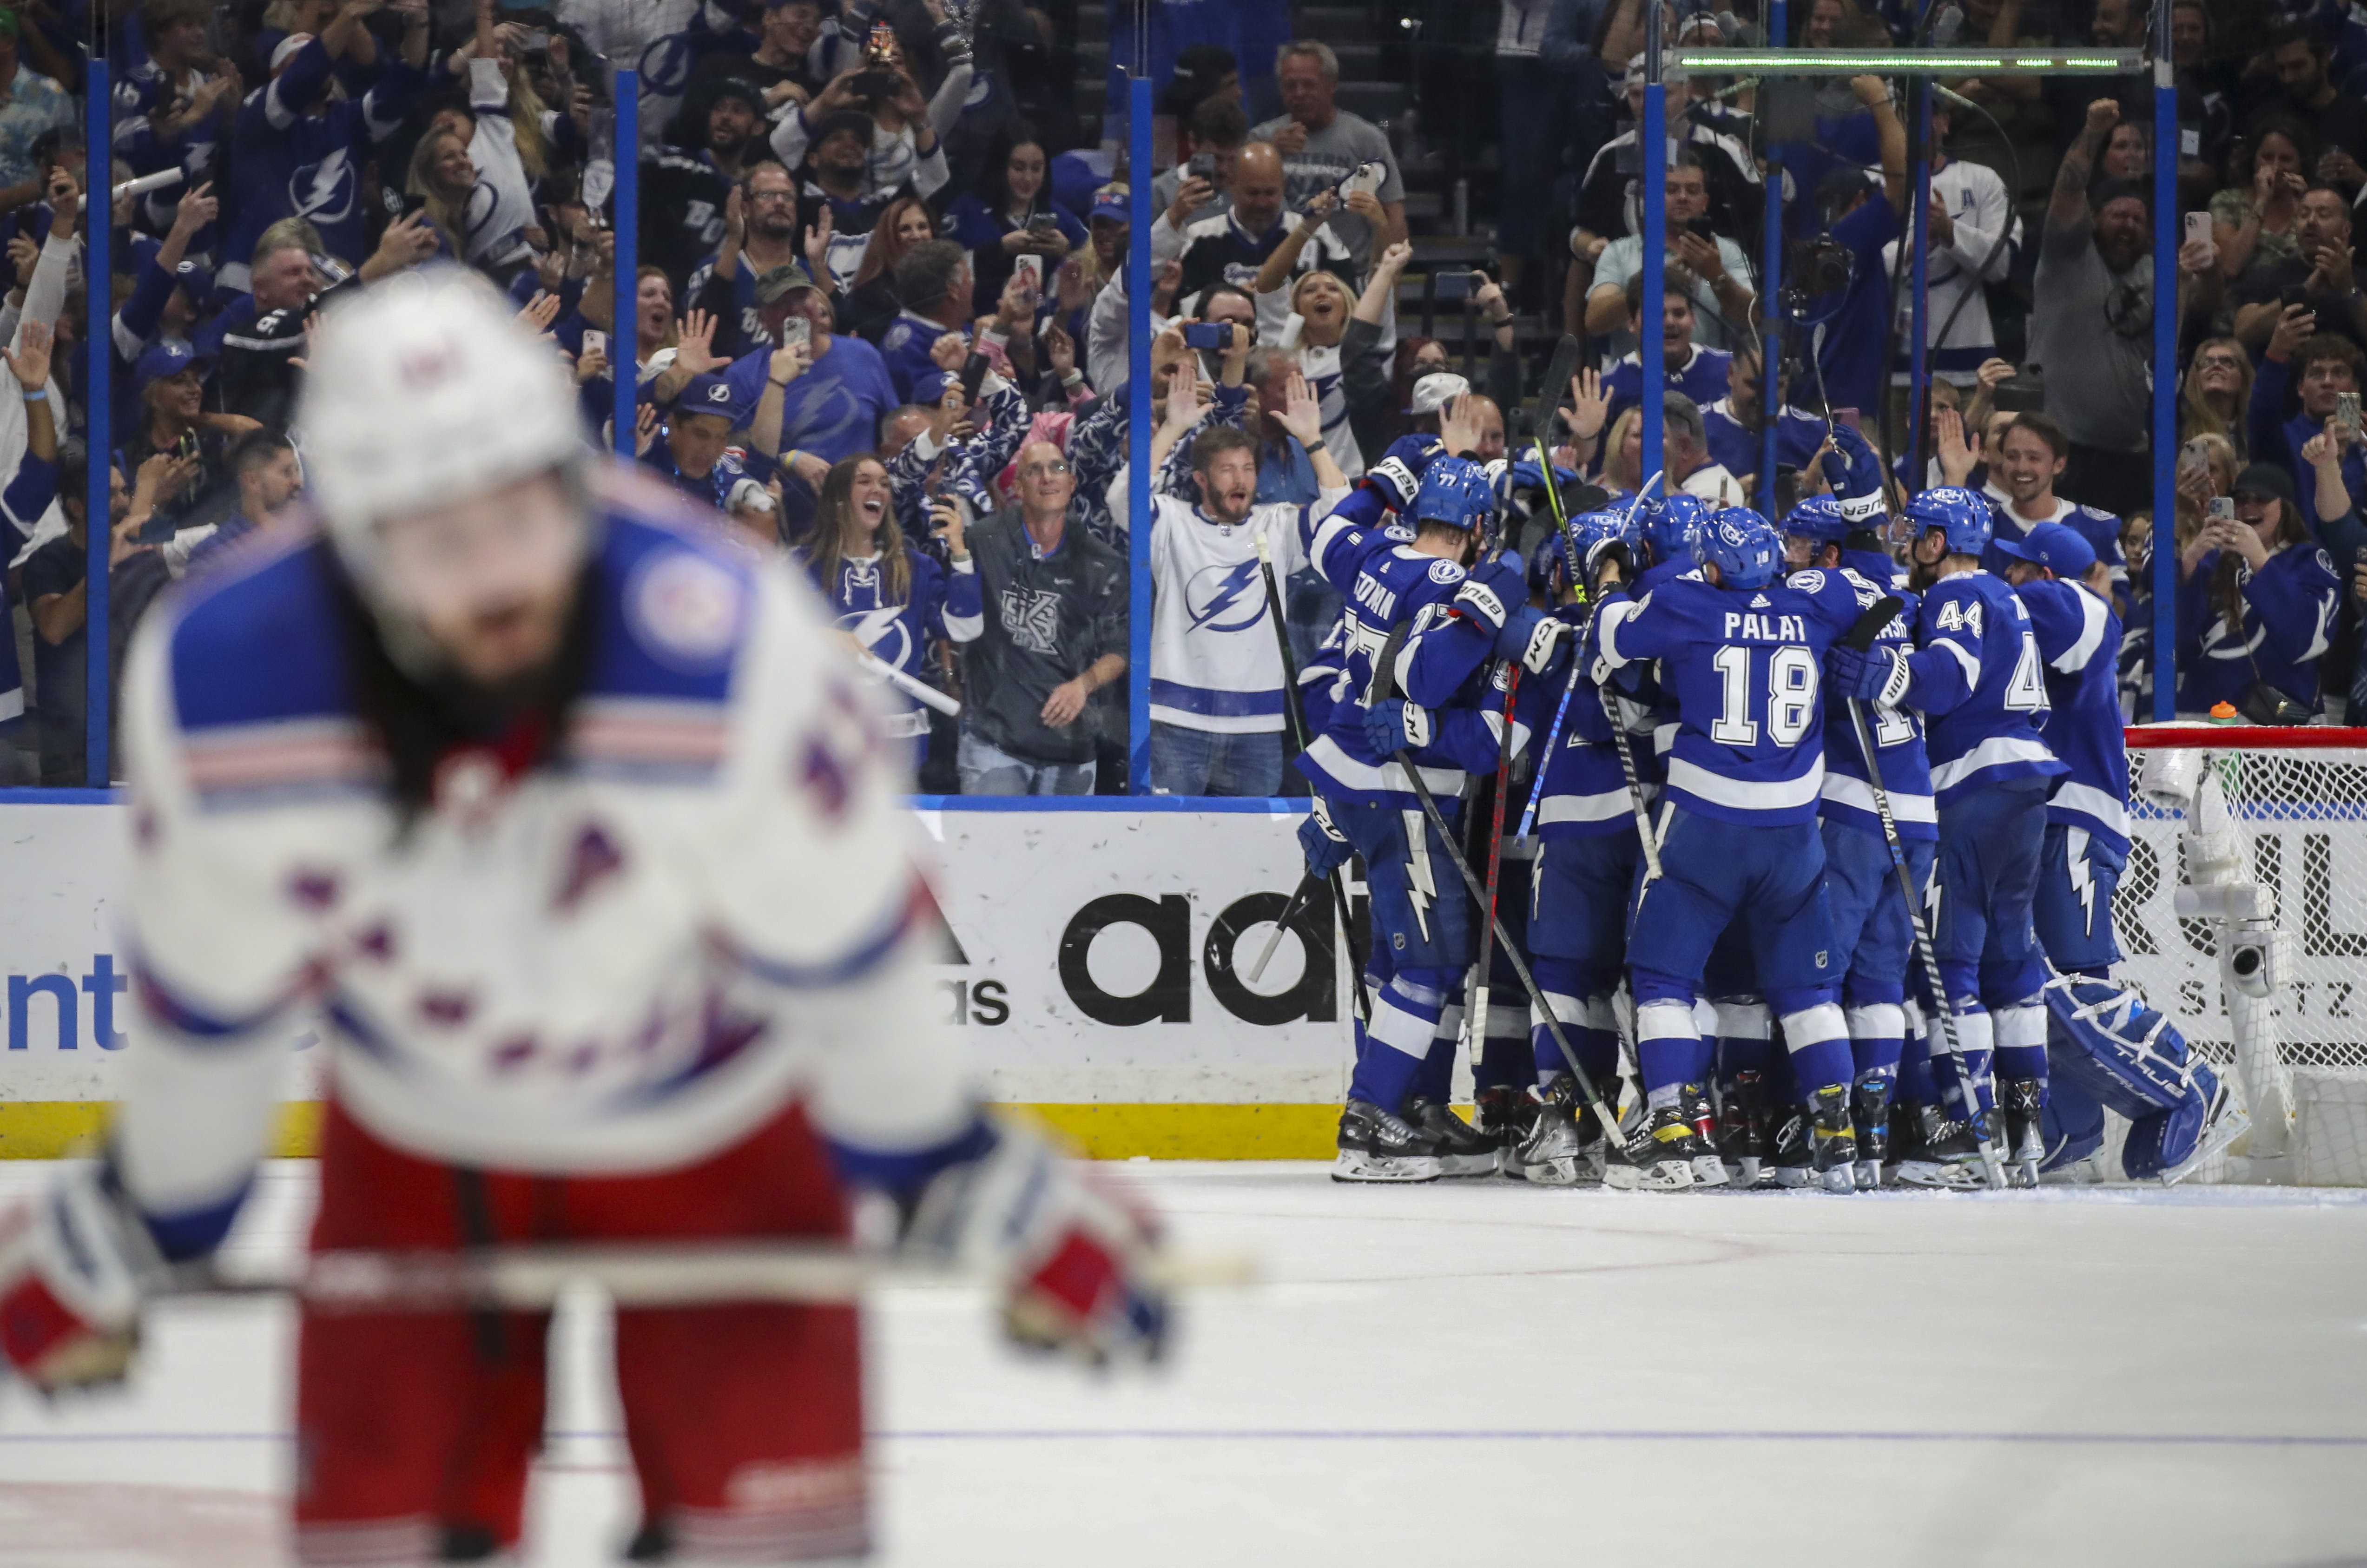 Lightning strikes twice: Tampa Bay mint NHL dynasty with Stanley Cup repeat, Stanley Cup